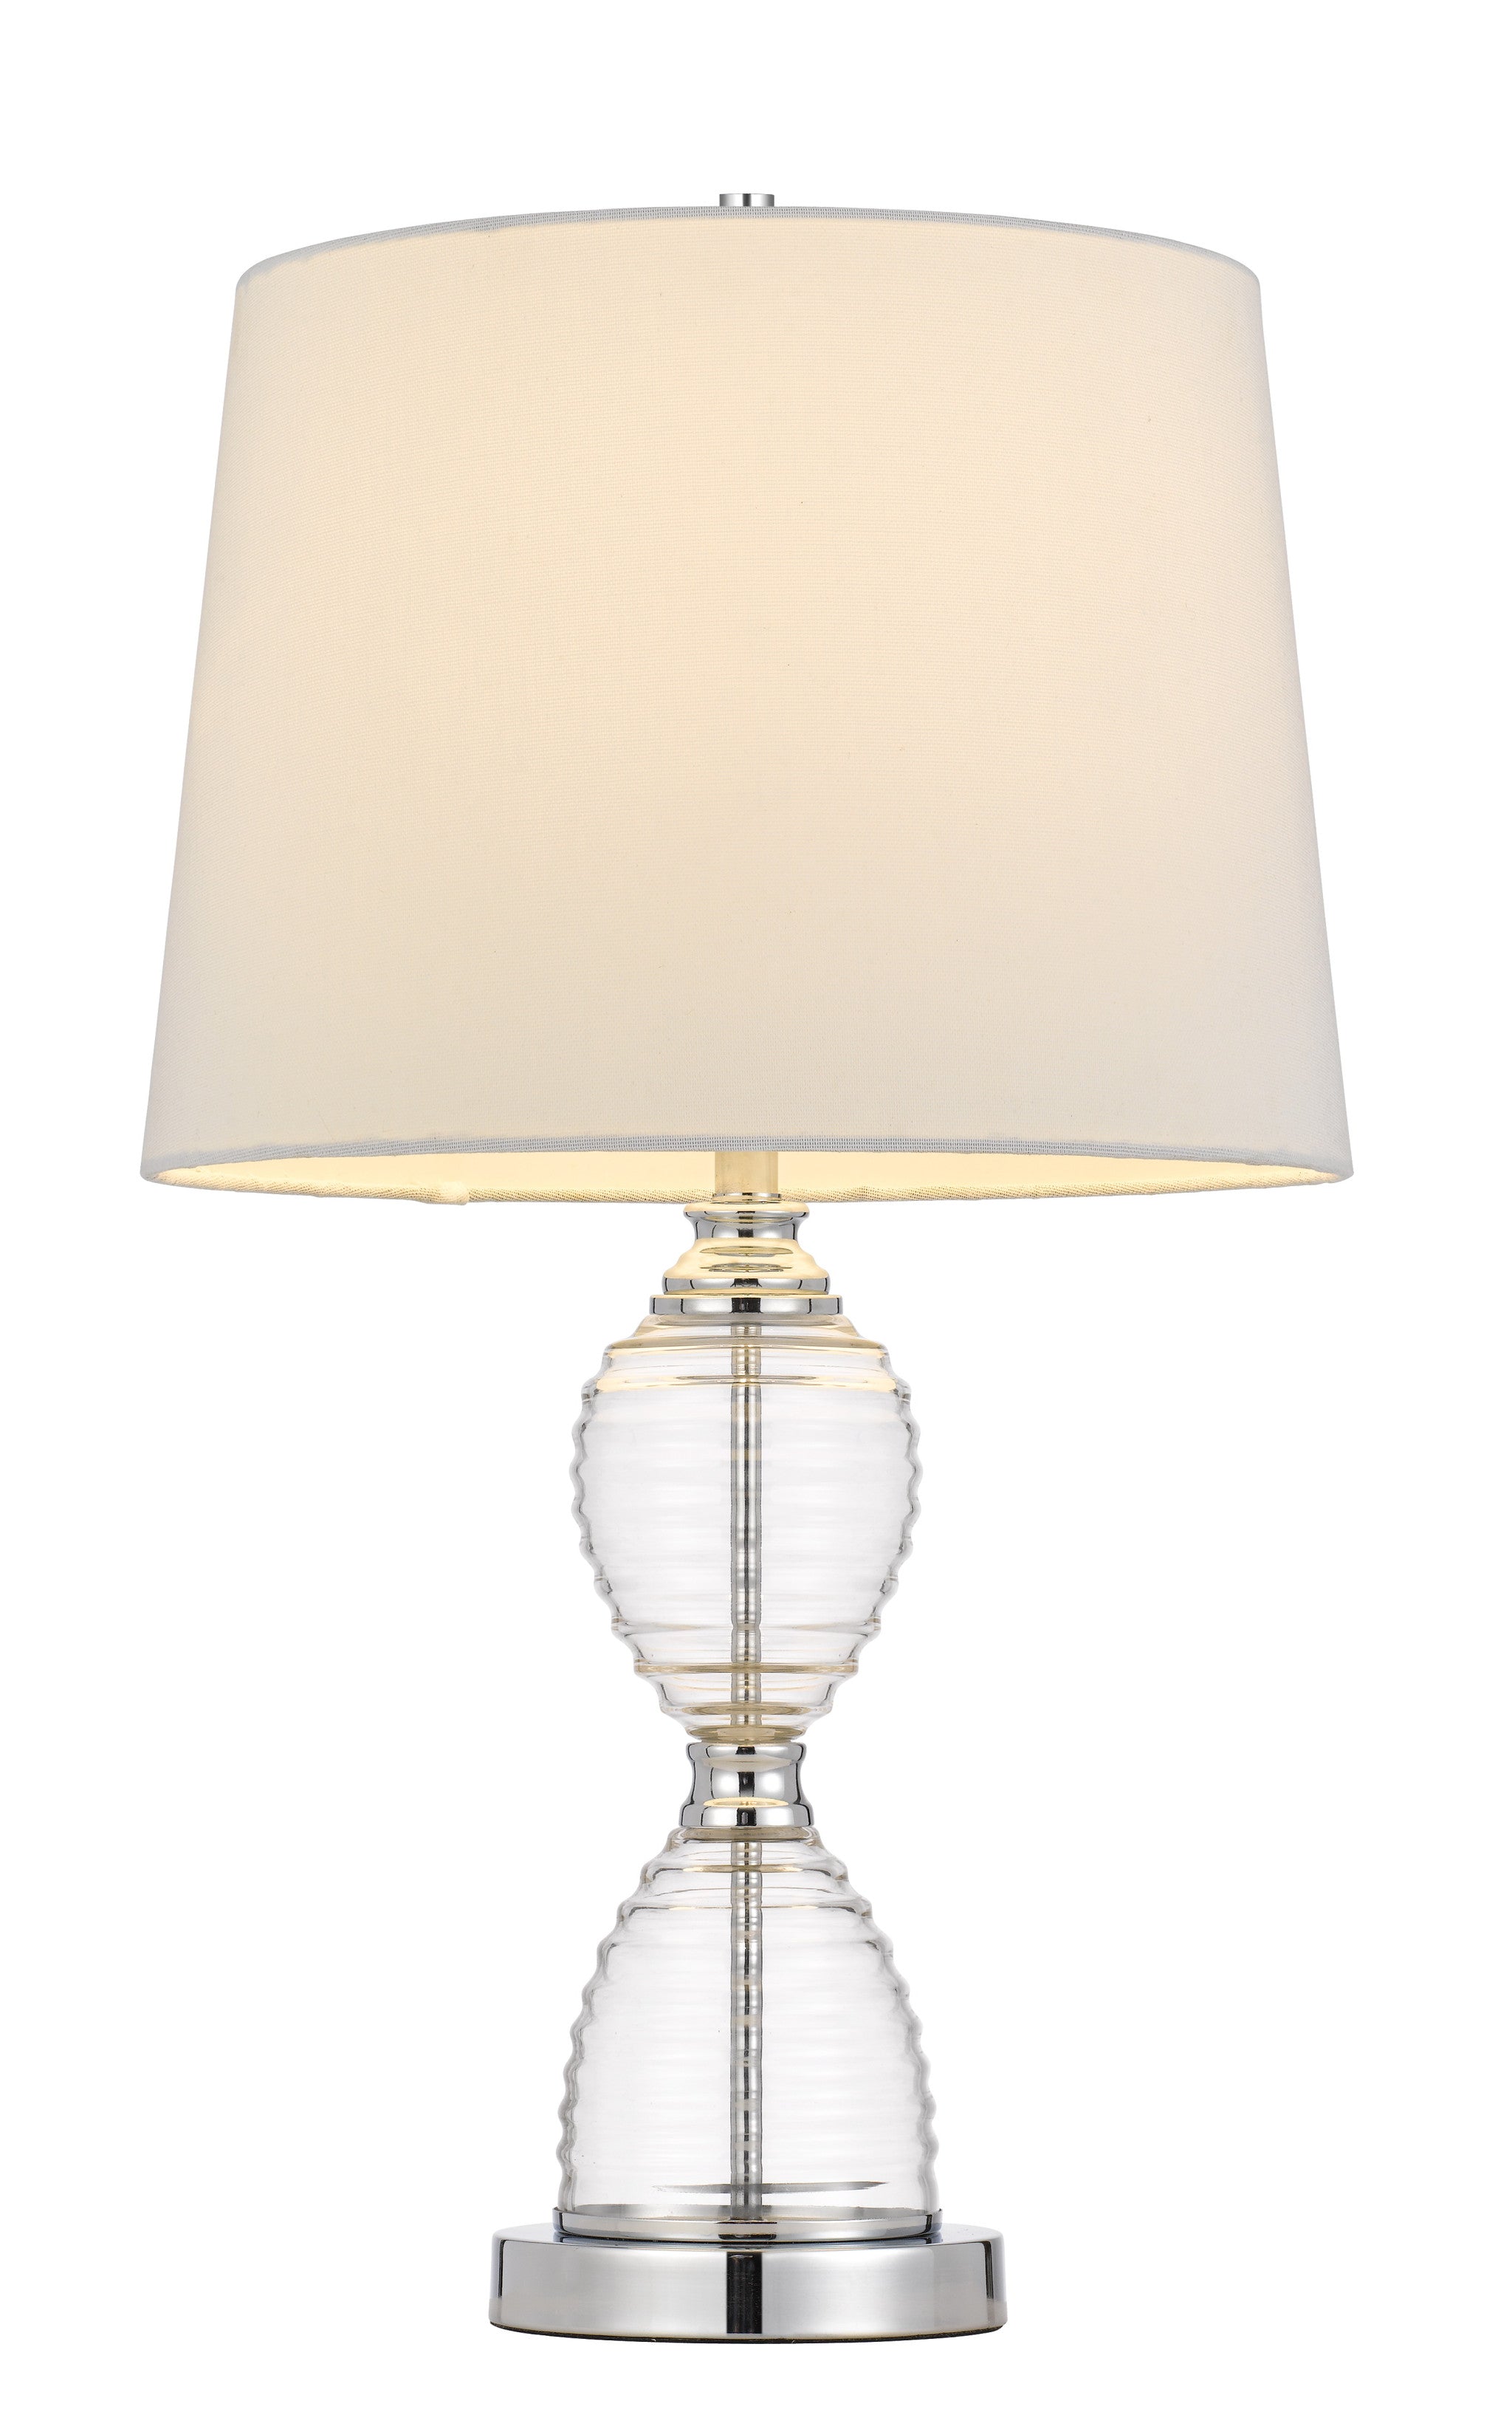 24" Clear Metal Table Lamp With White Empire Shade